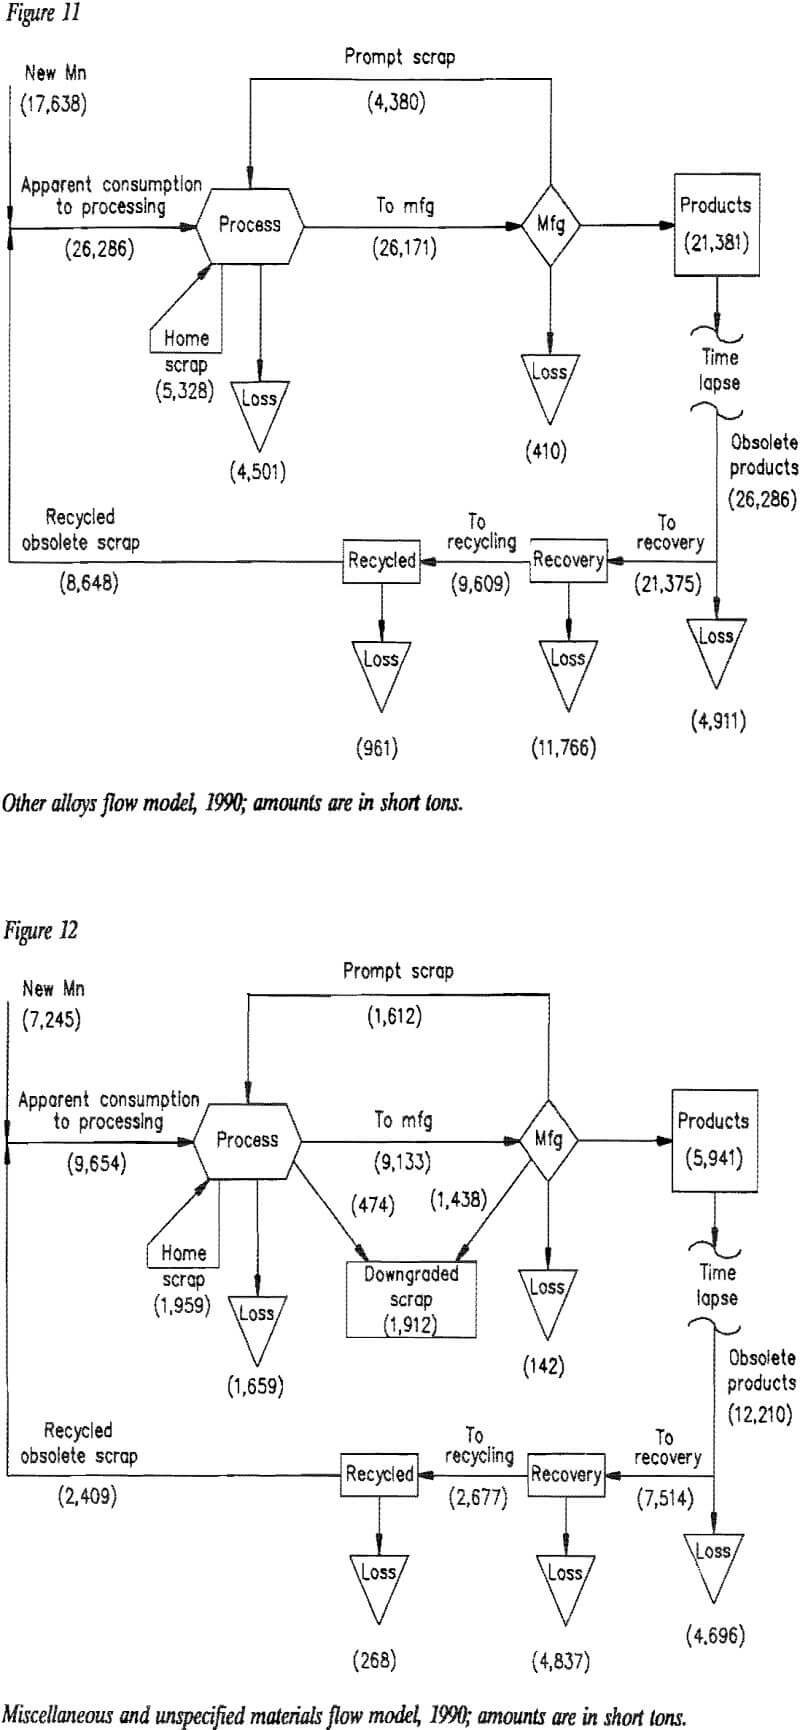 manganese-consumption other alloys flow model